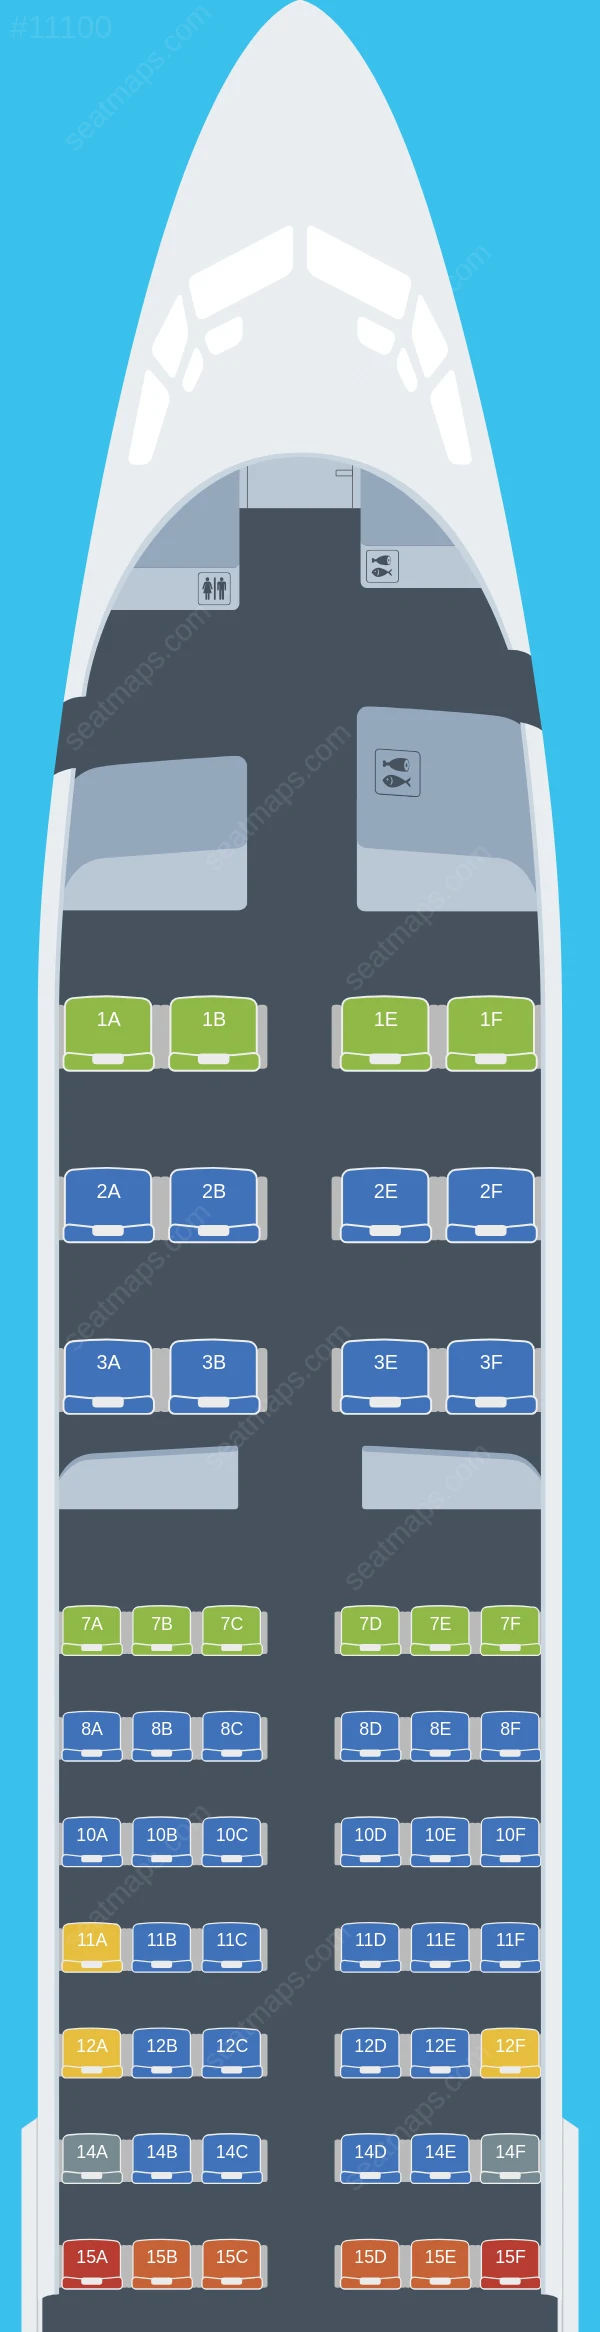 United Boeing 737-800 V.4 seatmap preview